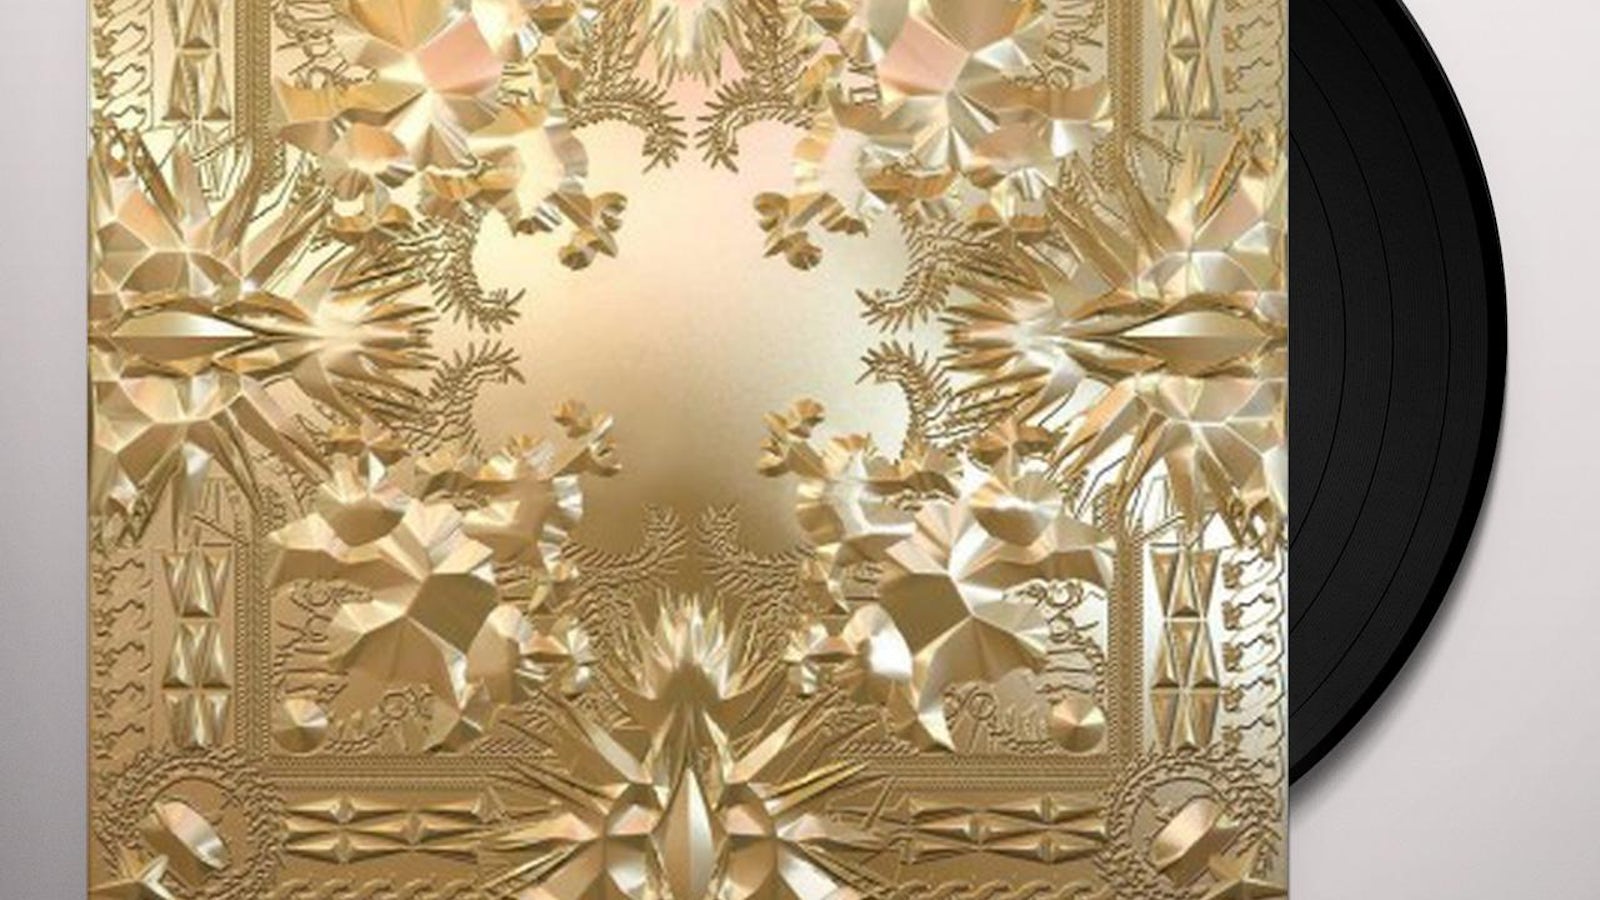 Kanye West / Jay-Z WATCH THE THRONE Vinyl Record